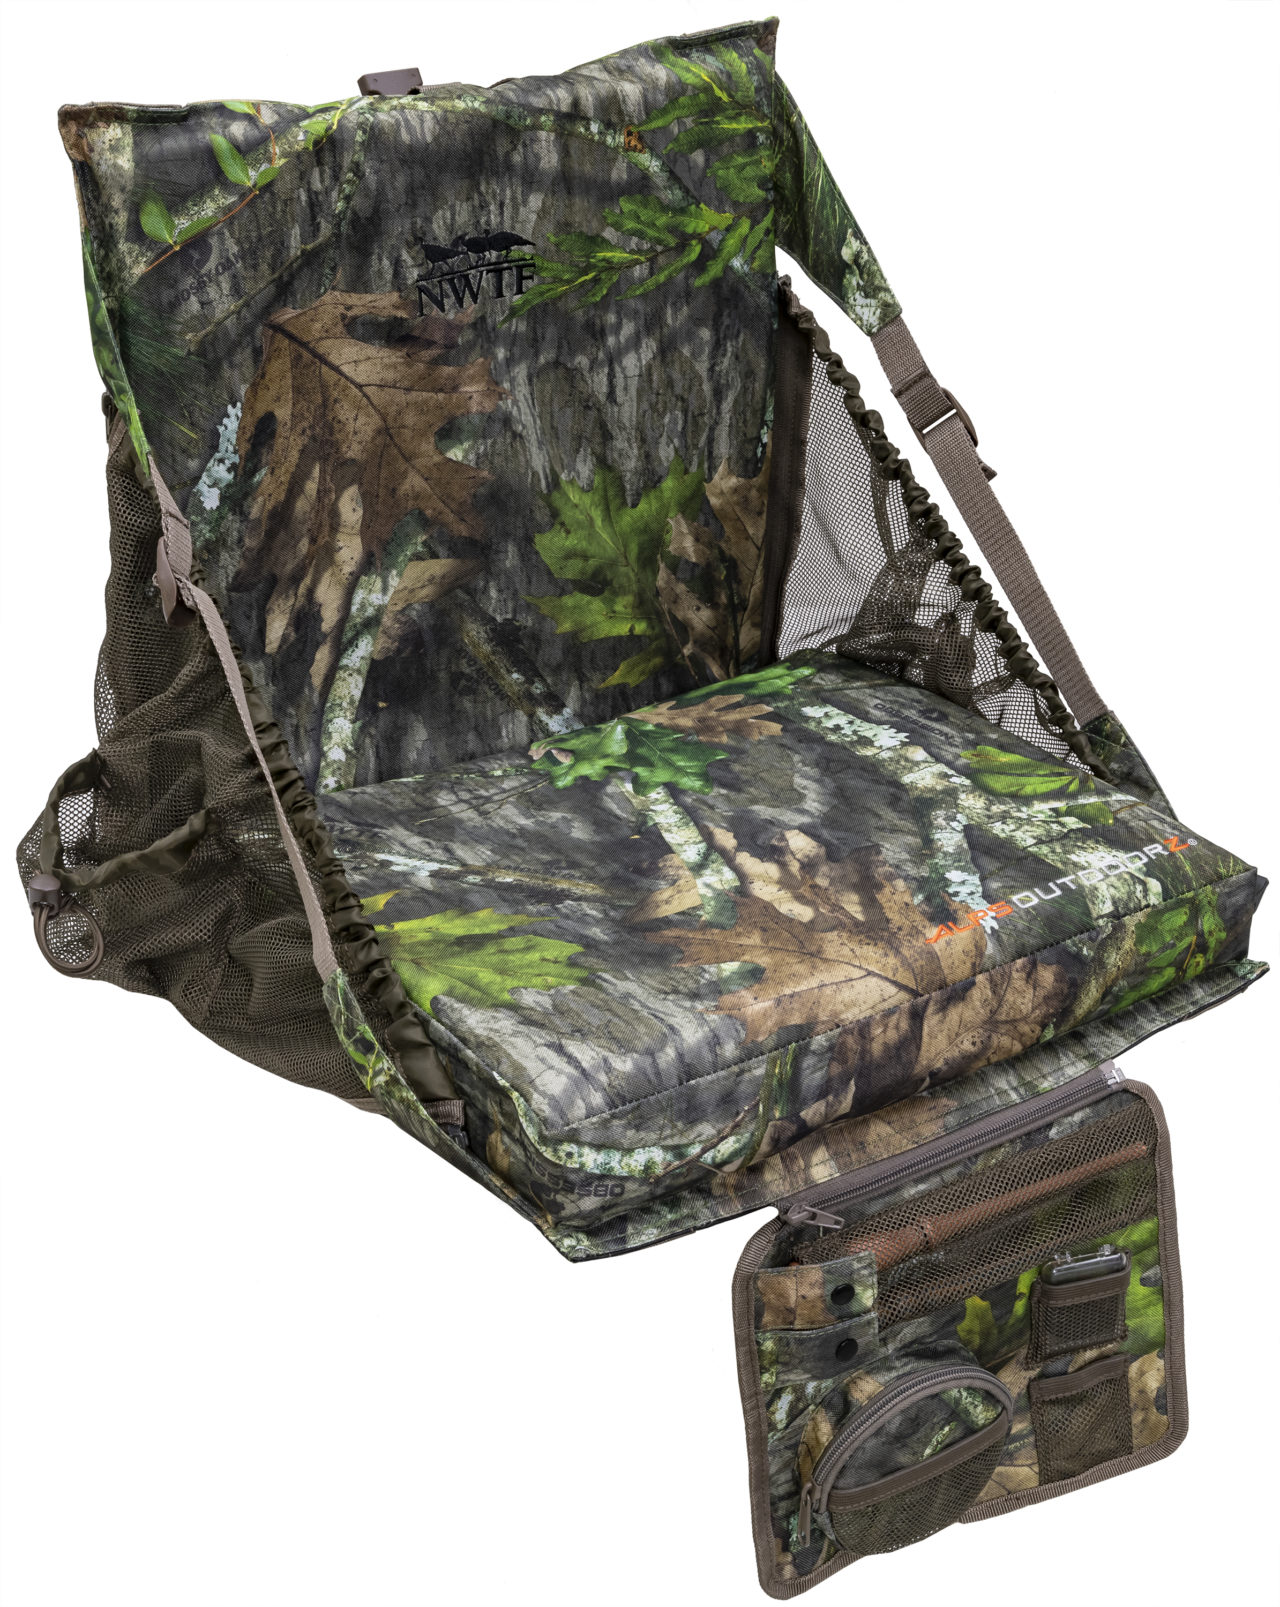 ALPS OutdoorZ Delivers a “Full-Feature” Turkey Hunting Seat